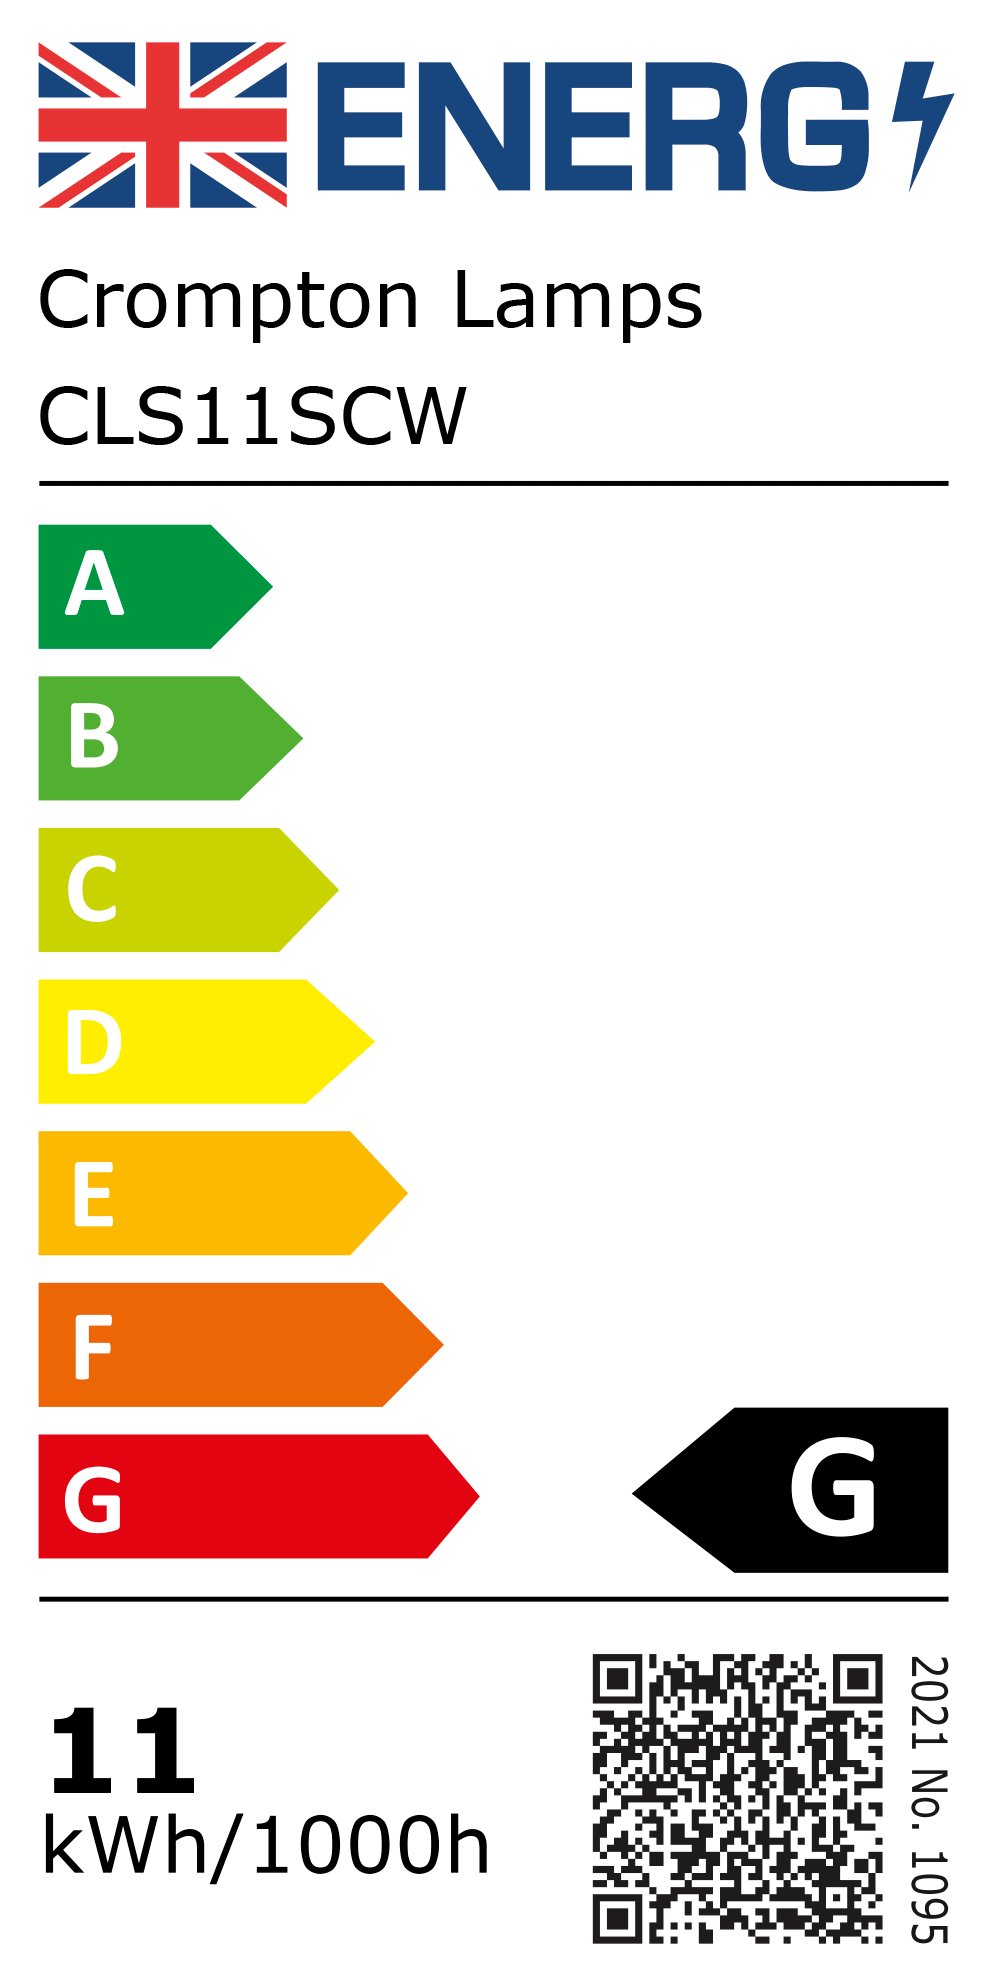 New 2021 Energy Rating Label: Stock Code CLS11SCW